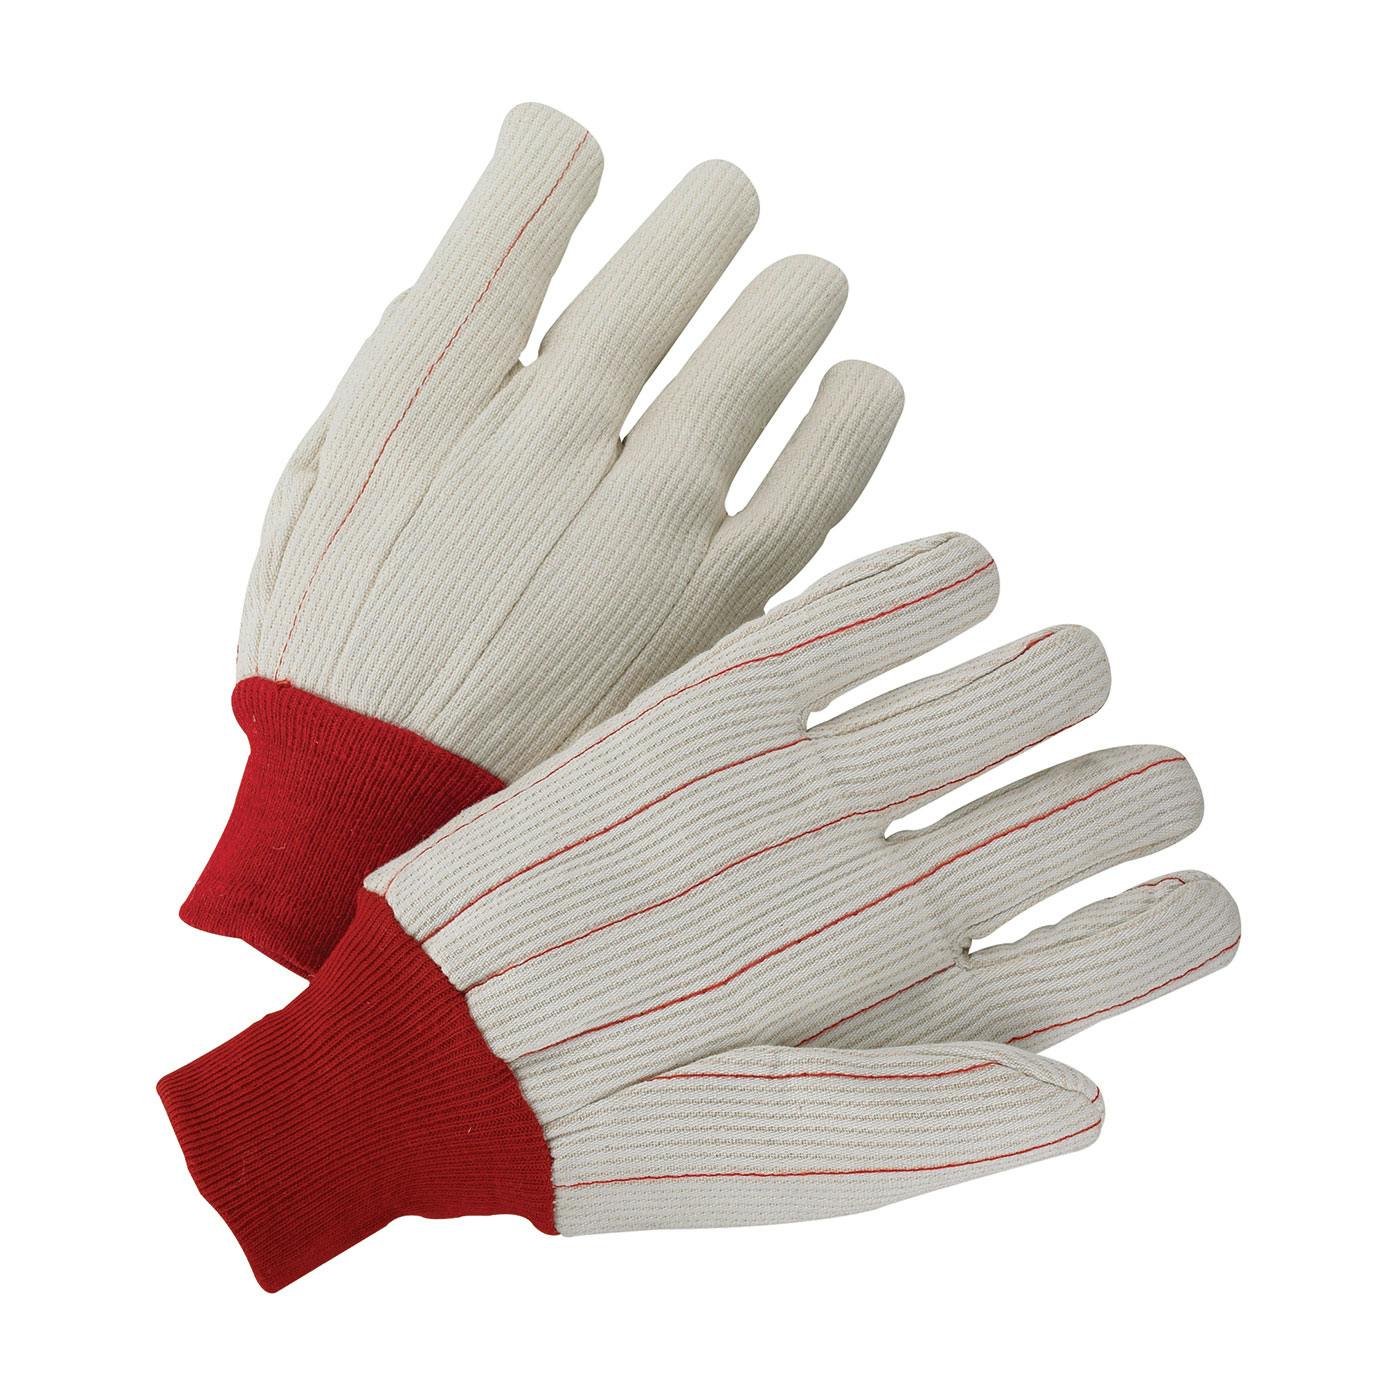 Polyester/Cotton Corded Double Palm Glove with Nap-In Finish - Red Knit Wrist, Natural (K81SCNCRI) - L